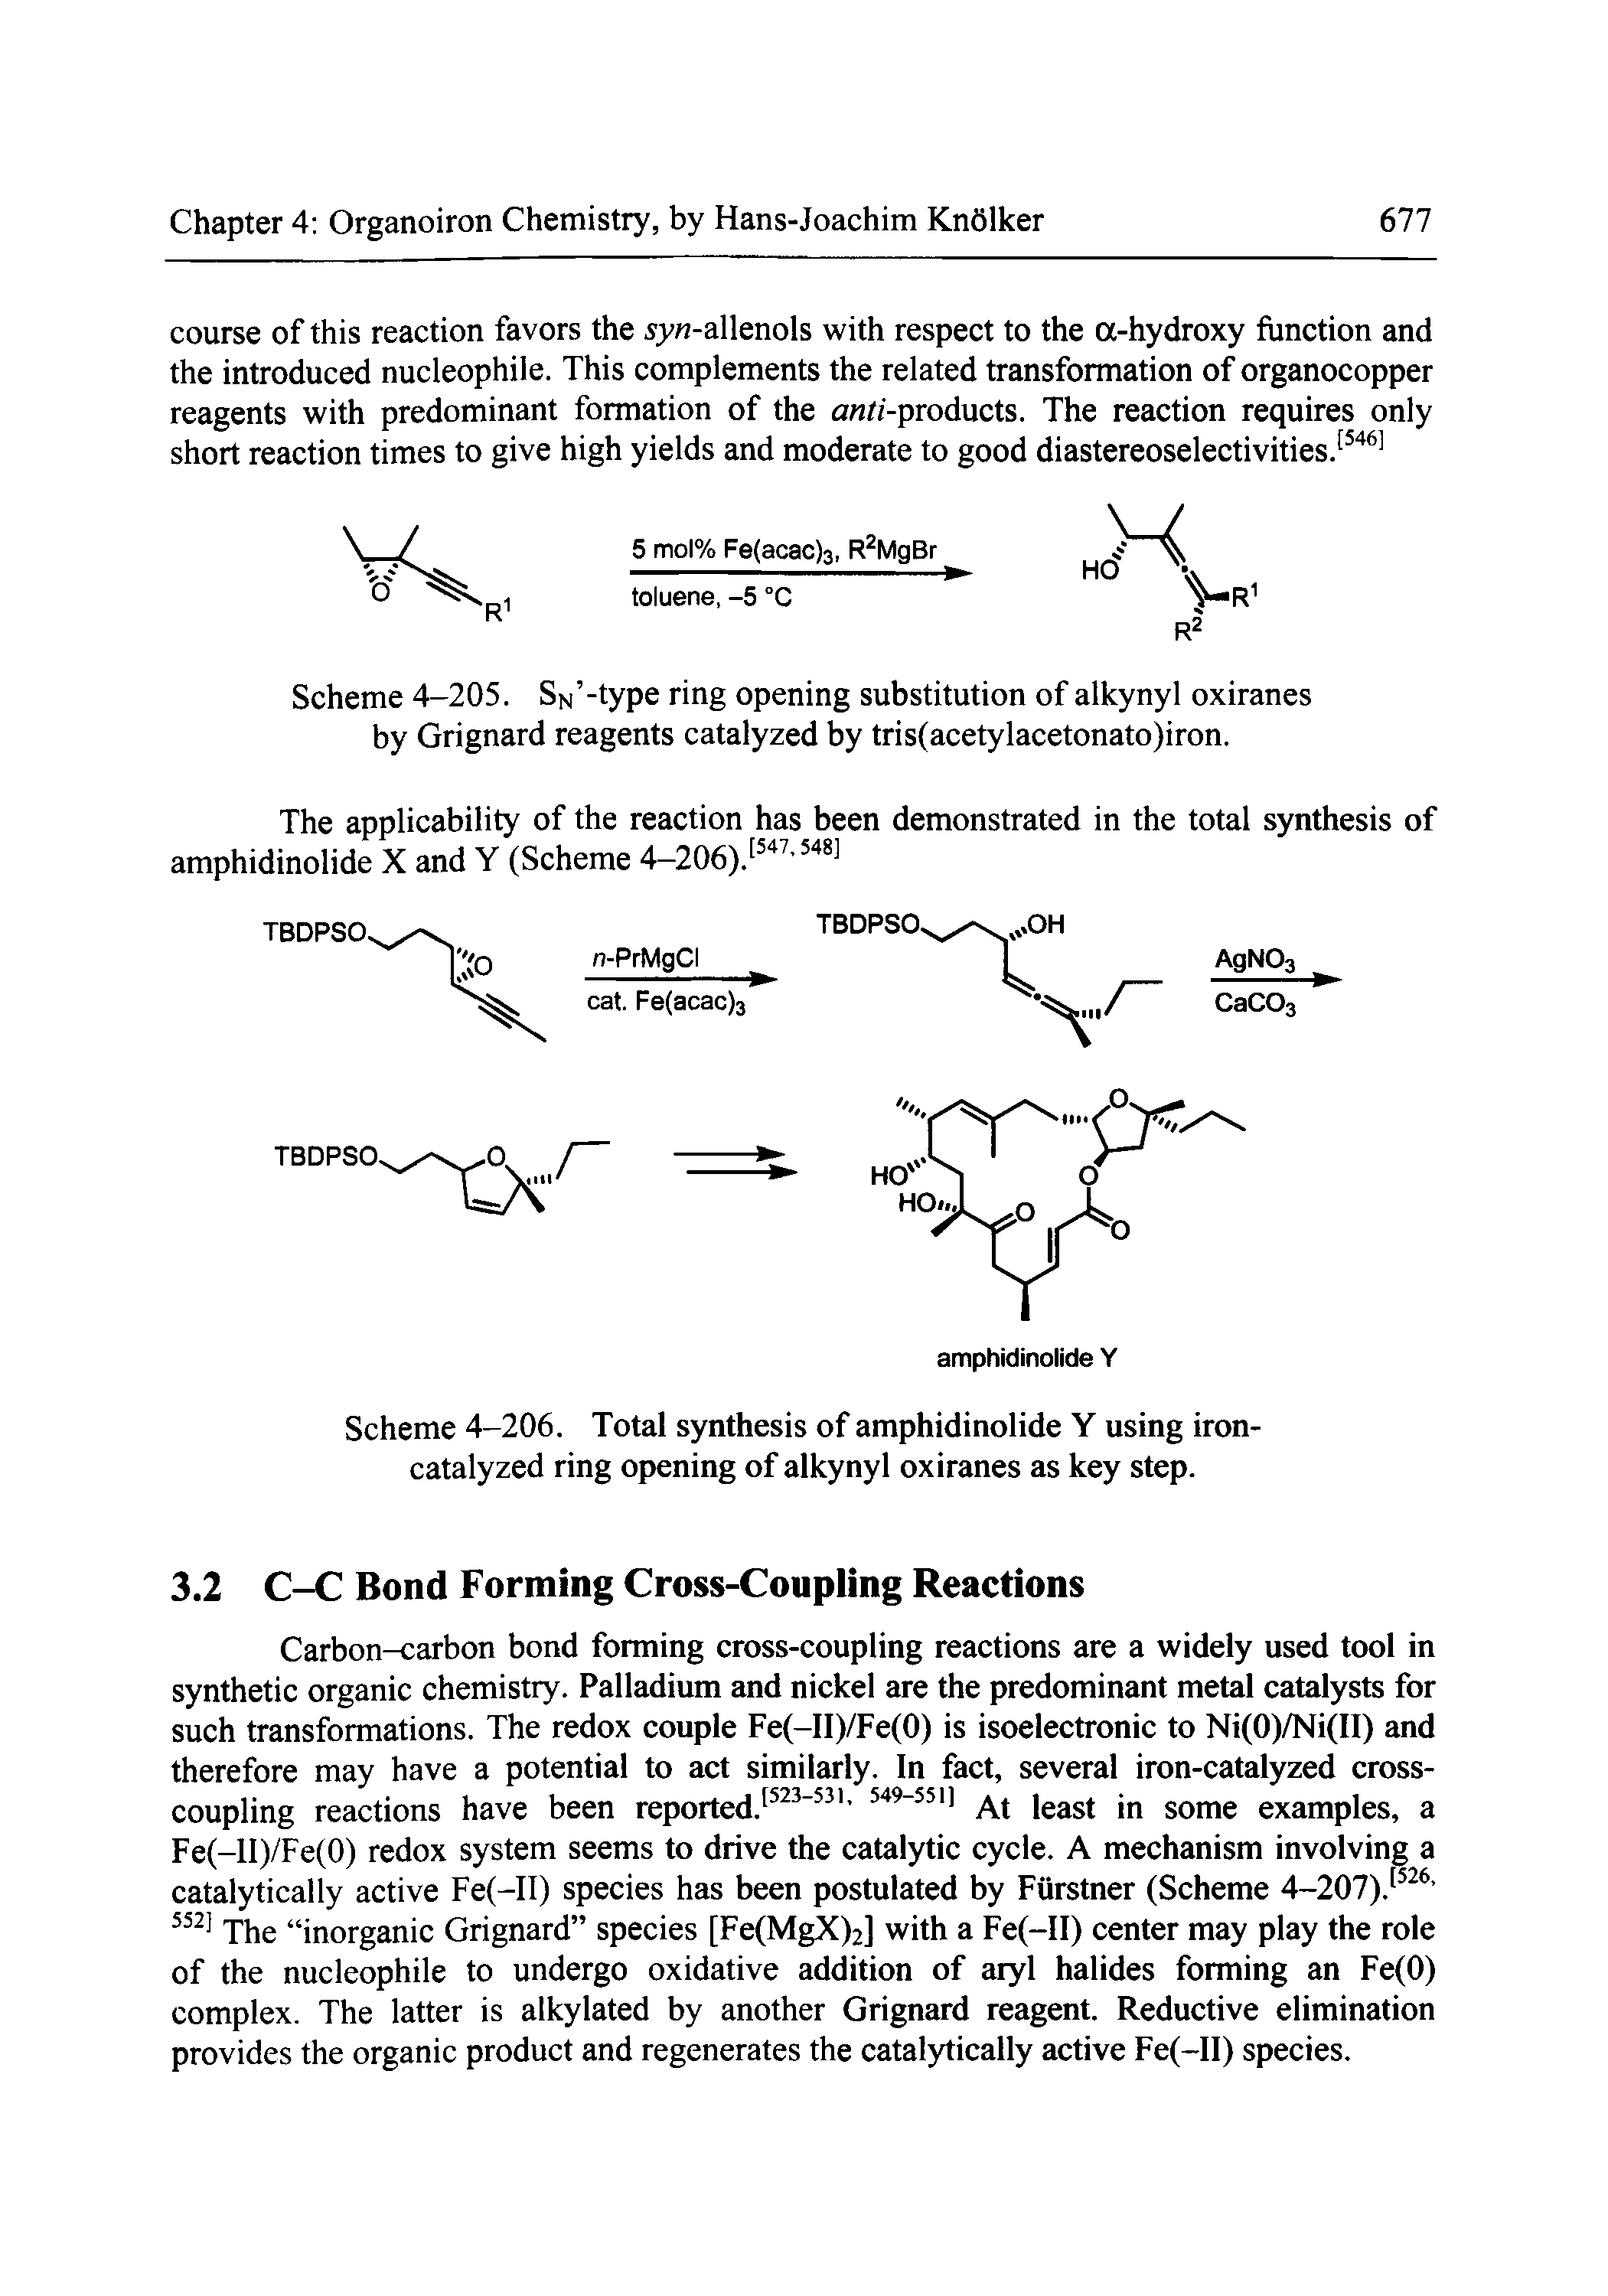 Scheme 4-205. SN -type ring opening substitution of alkynyl oxiranes by Grignard reagents catalyzed by tris(acetylacetonato)iron.